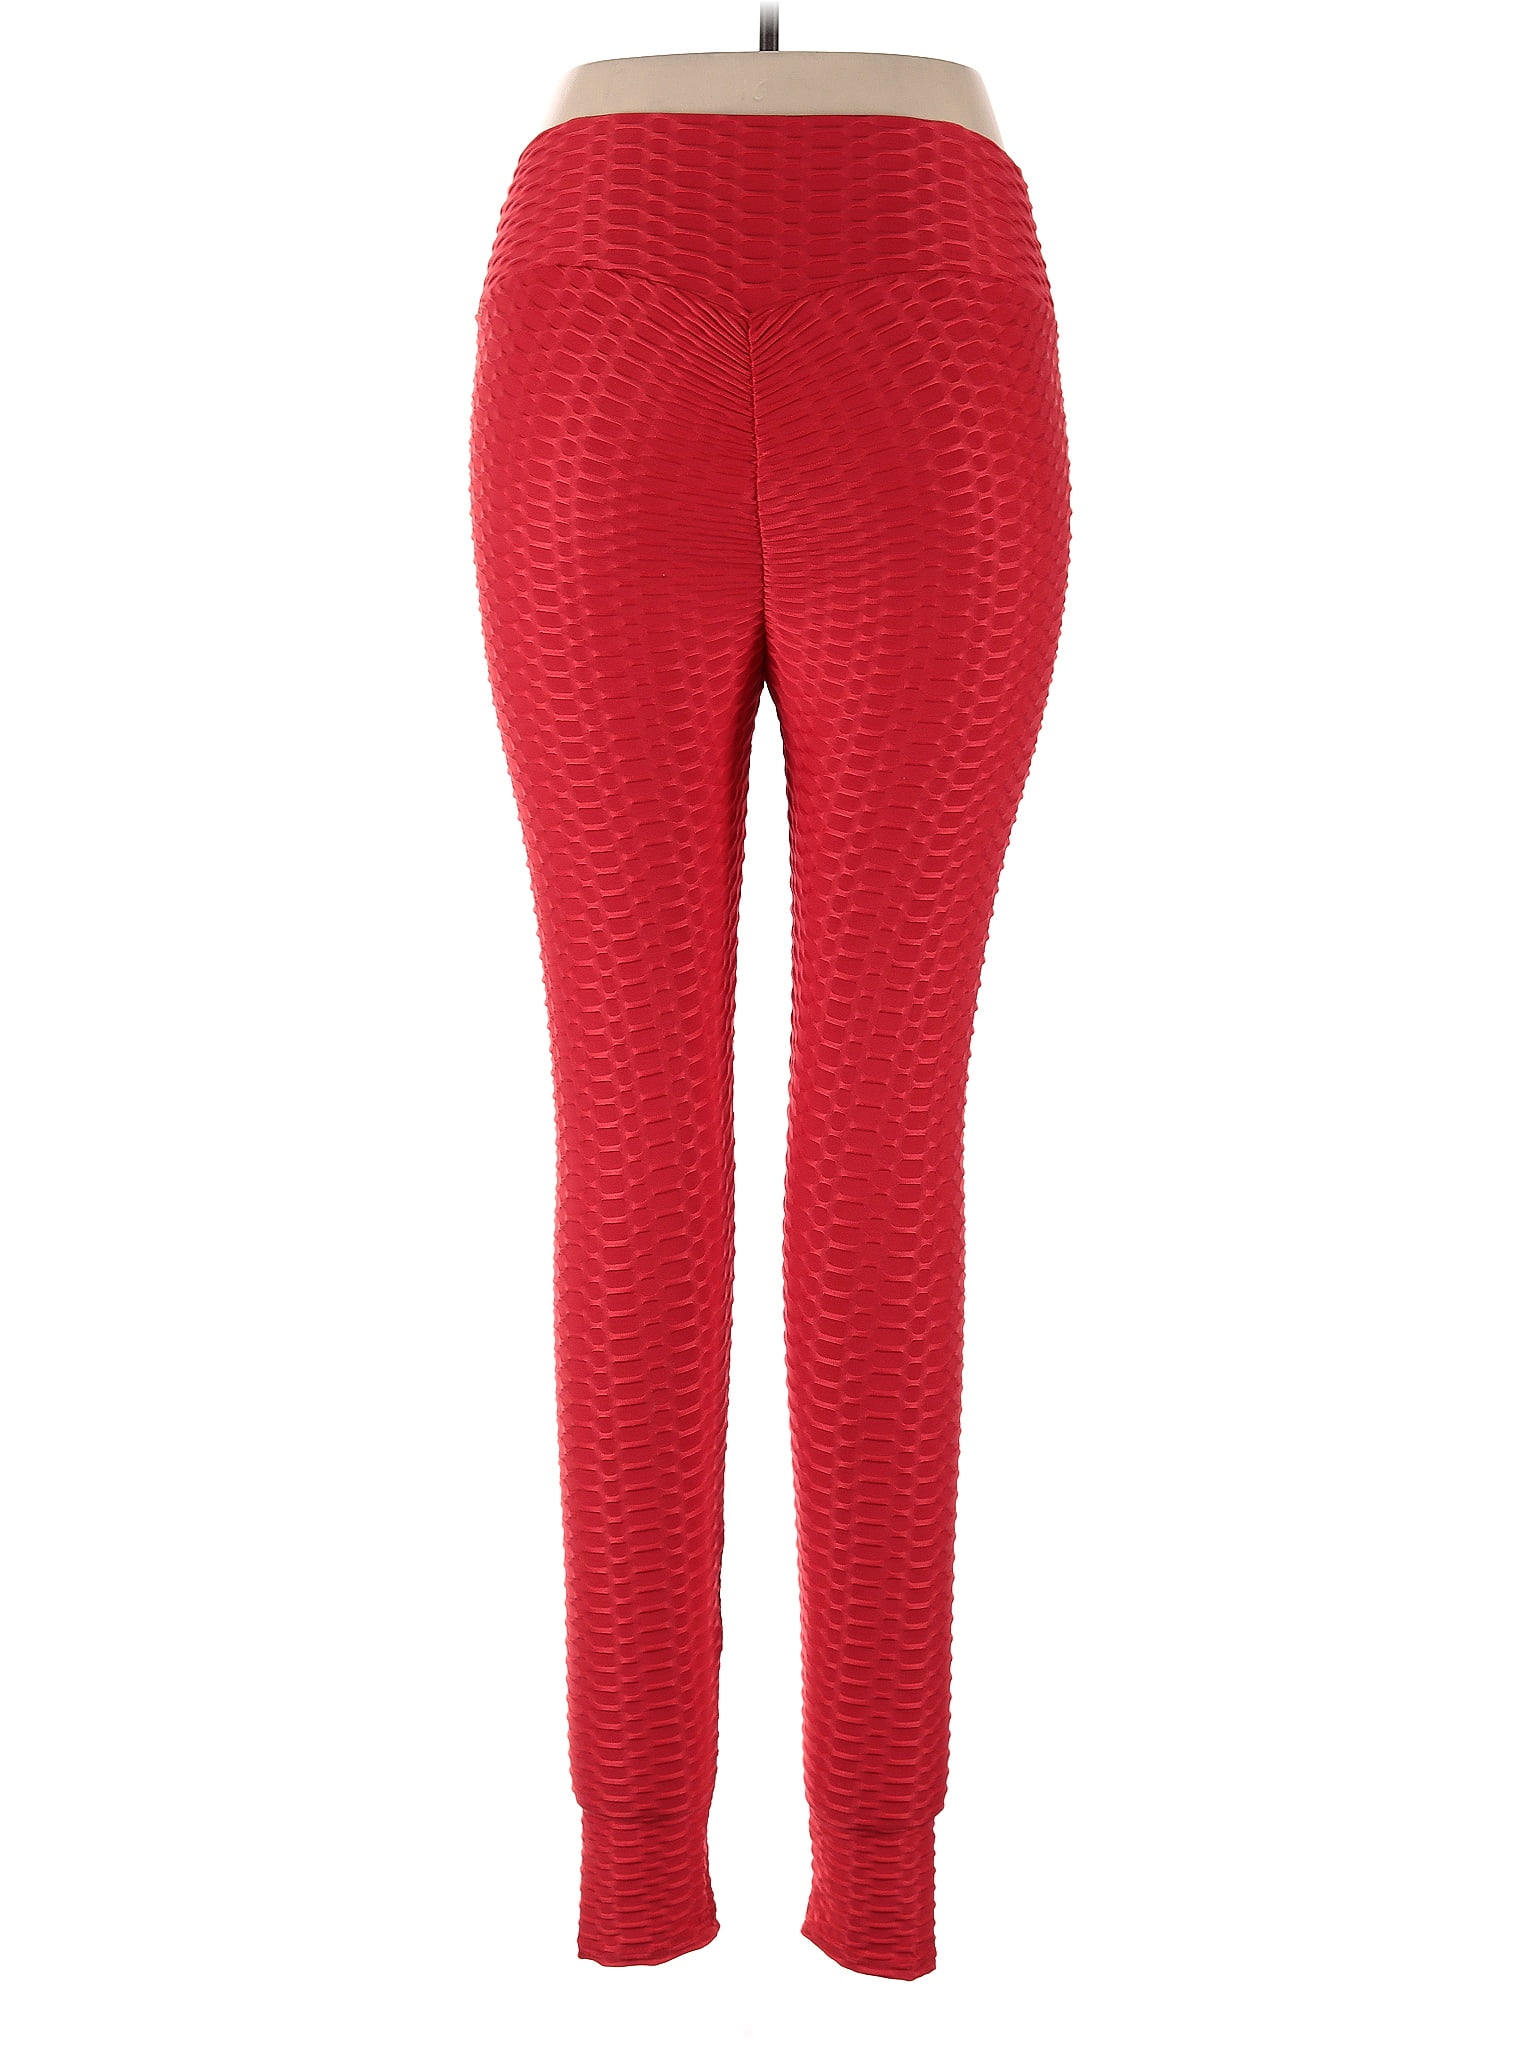 Unbranded Red Active Pants Size XL - 63% off